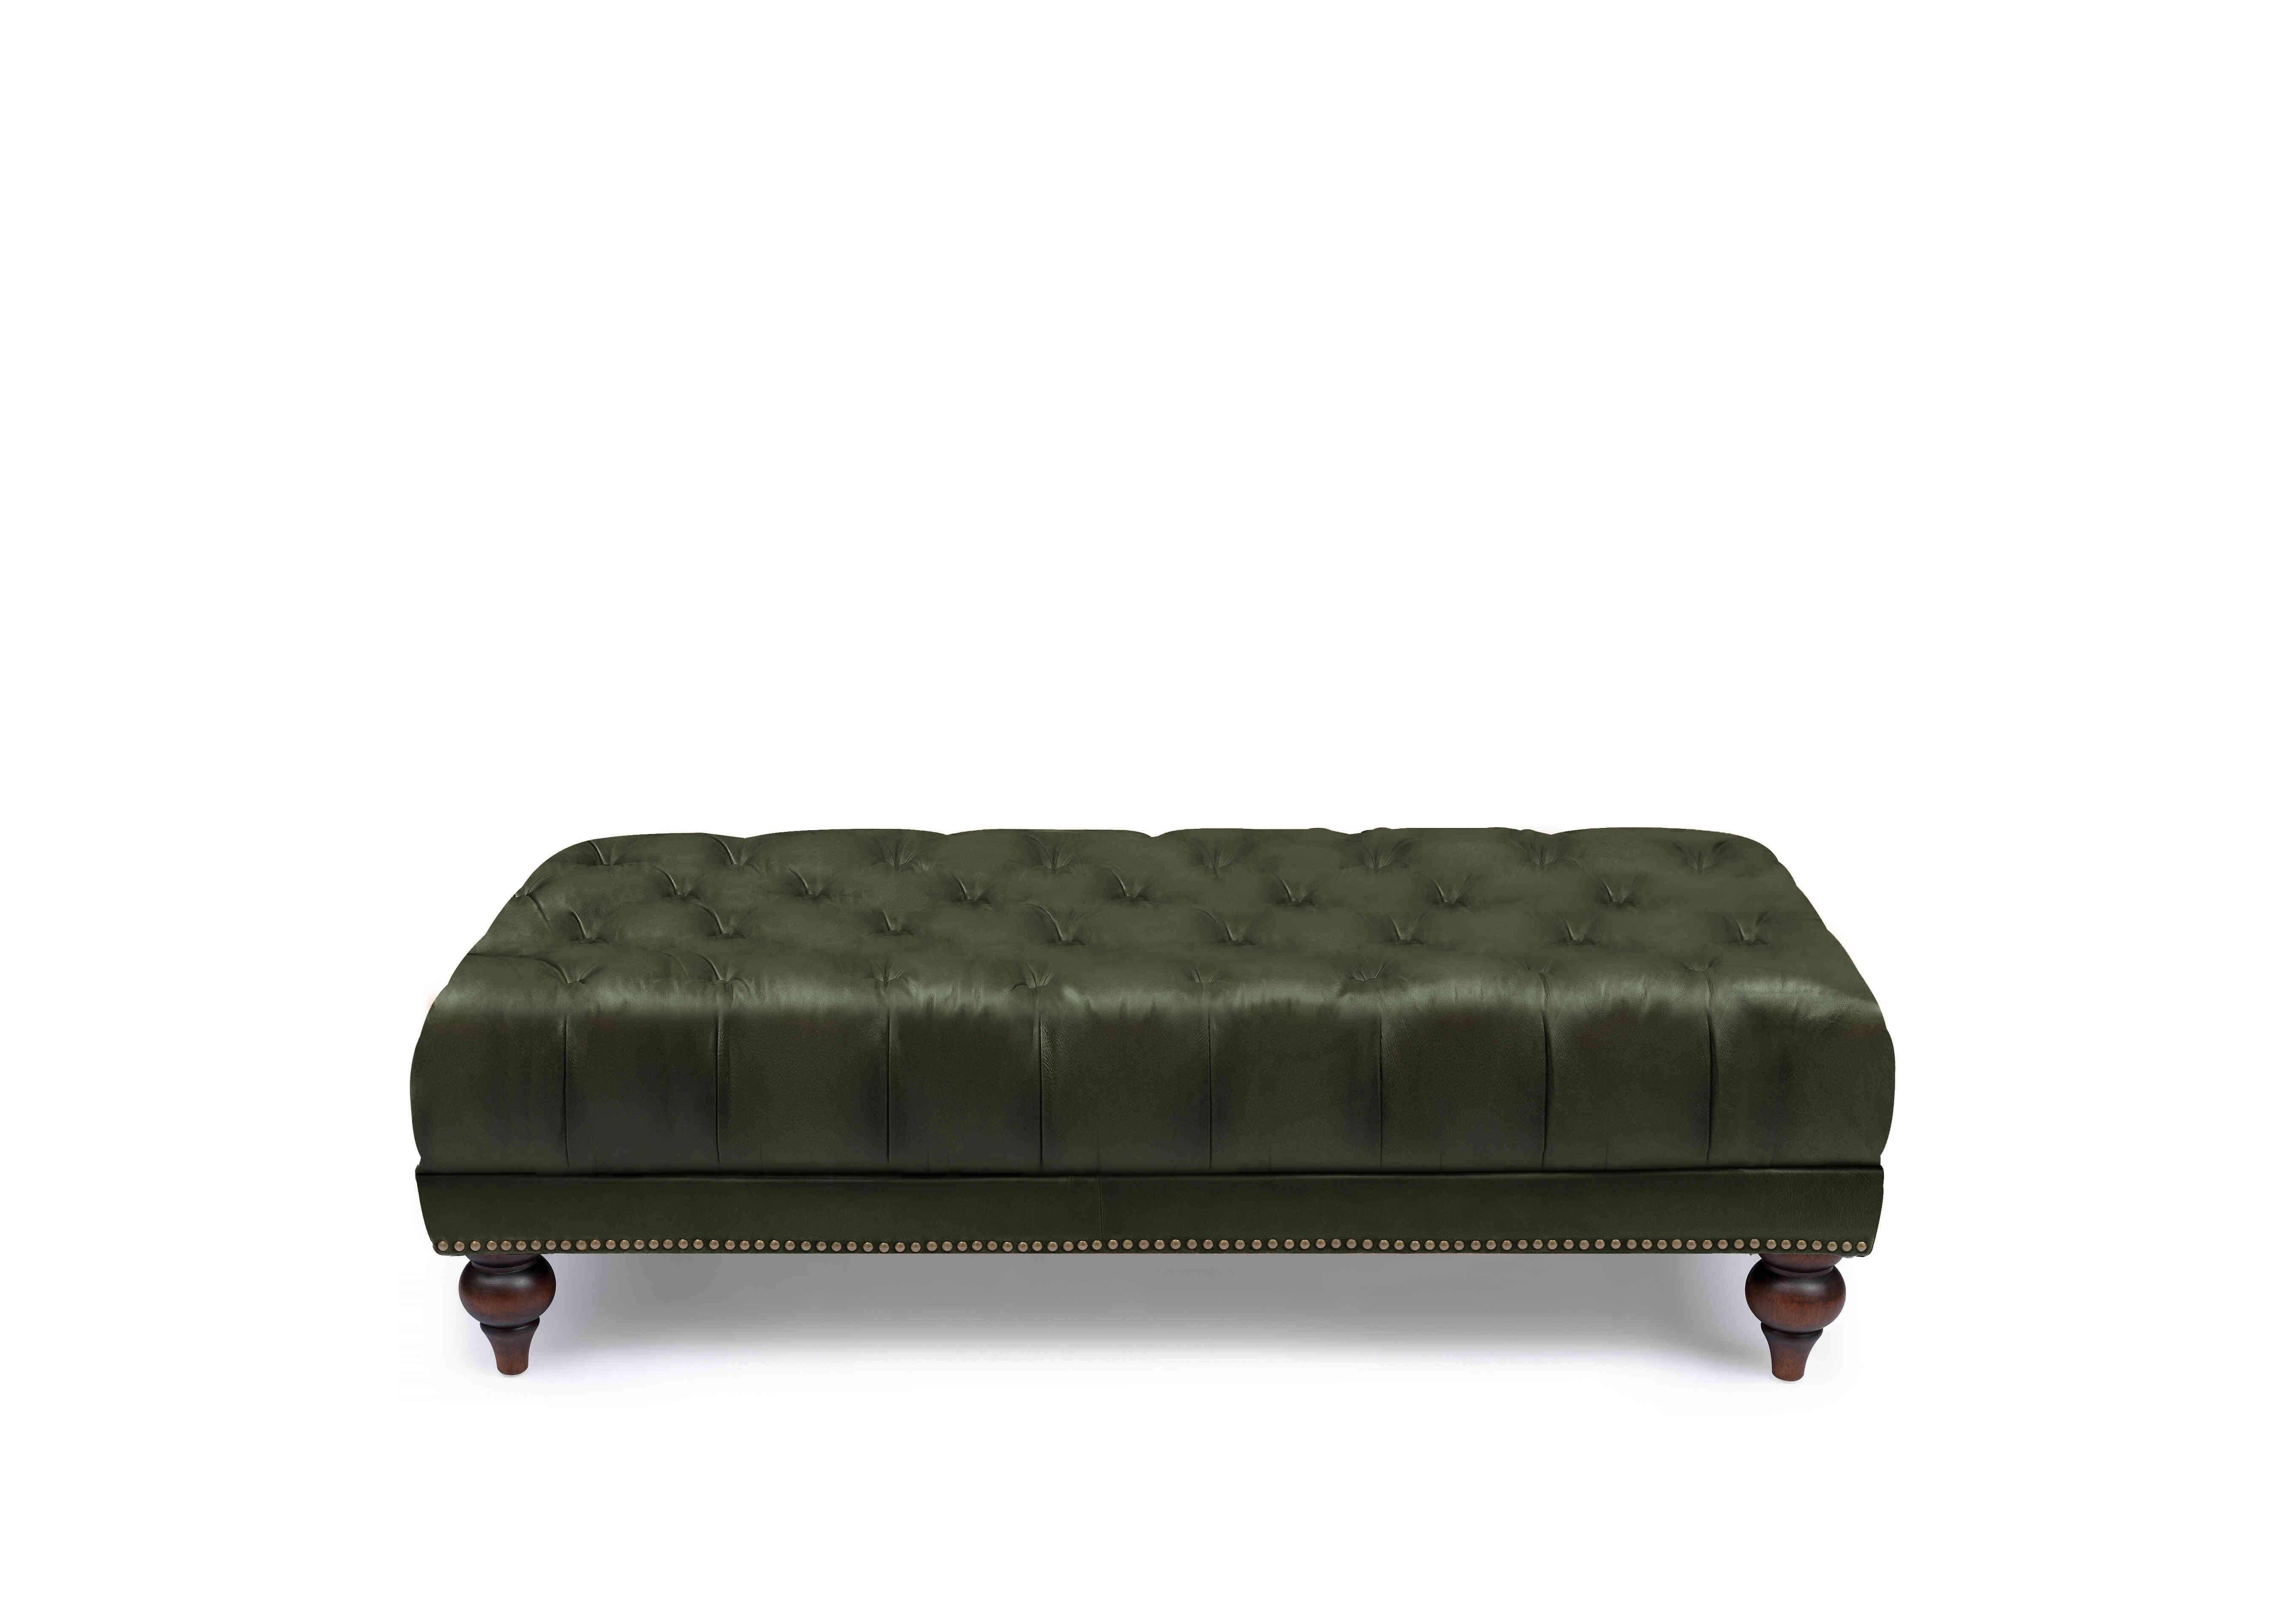 Wallace Leather Rectangular Footstool with Turned Feet in X3y1-1965ls Emerald on Furniture Village